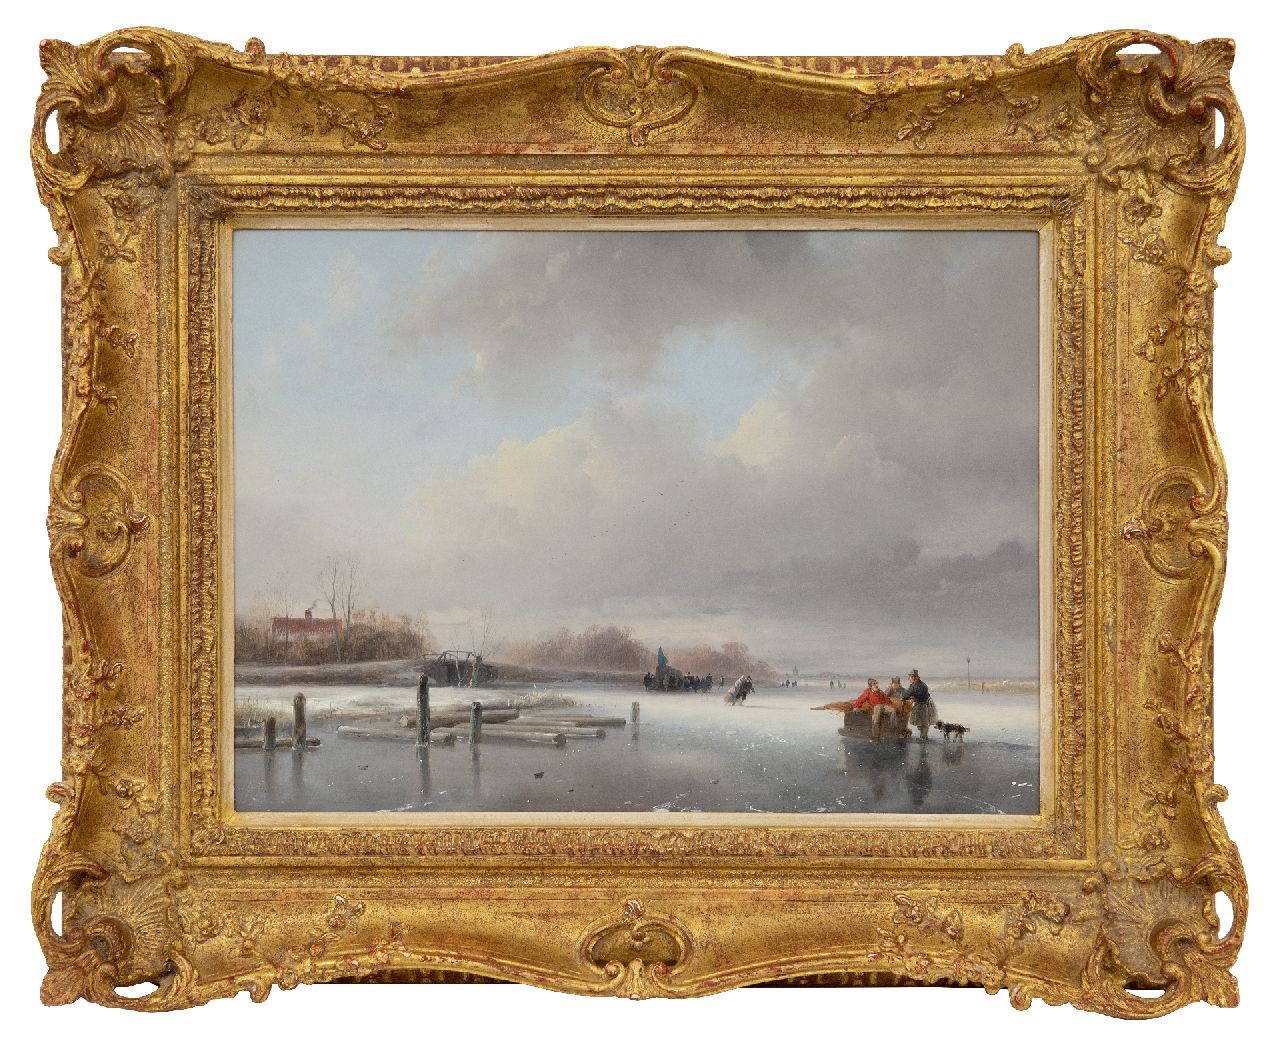 Schelfhout A.  | Andreas Schelfhout | Paintings offered for sale | Frozen river with skaters and a koek and zopie, oil on panel 29.5 x 40.0 cm, signed l.l. and painted ca. 1832-1834